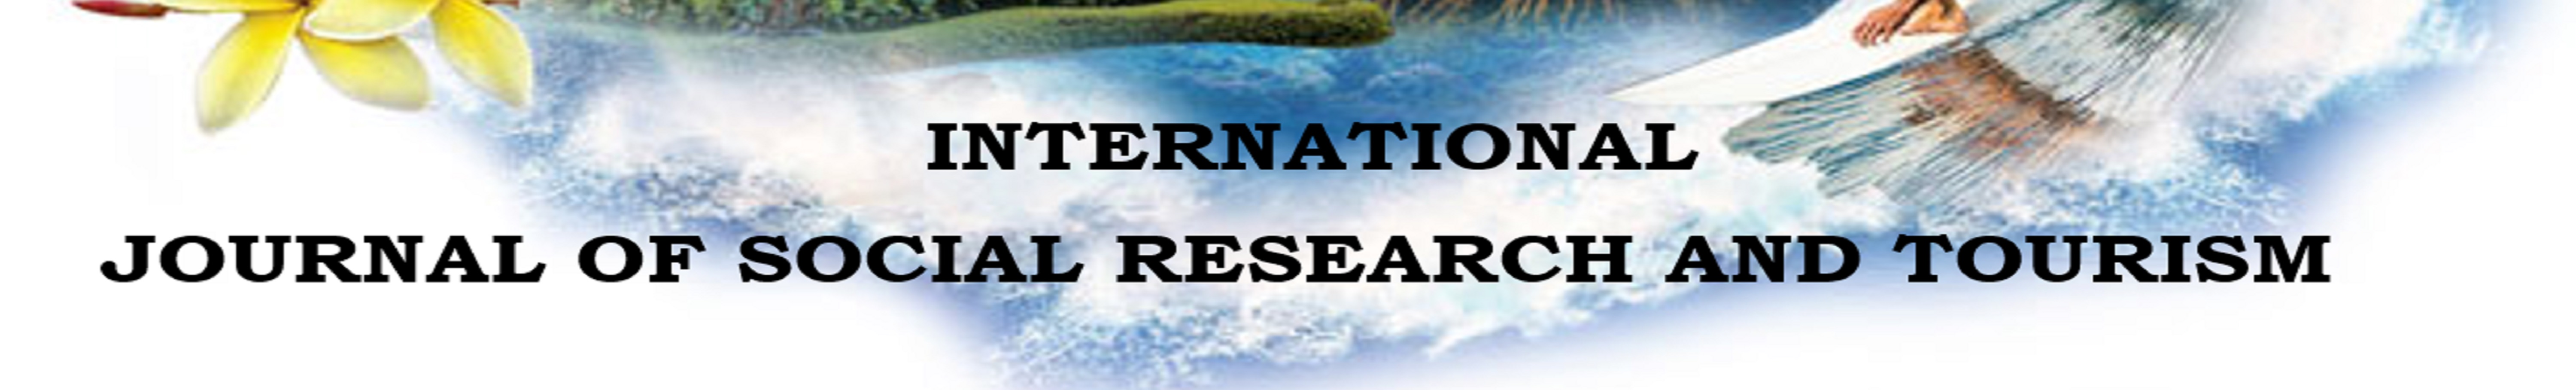 International Journal of Social Research and Tourism